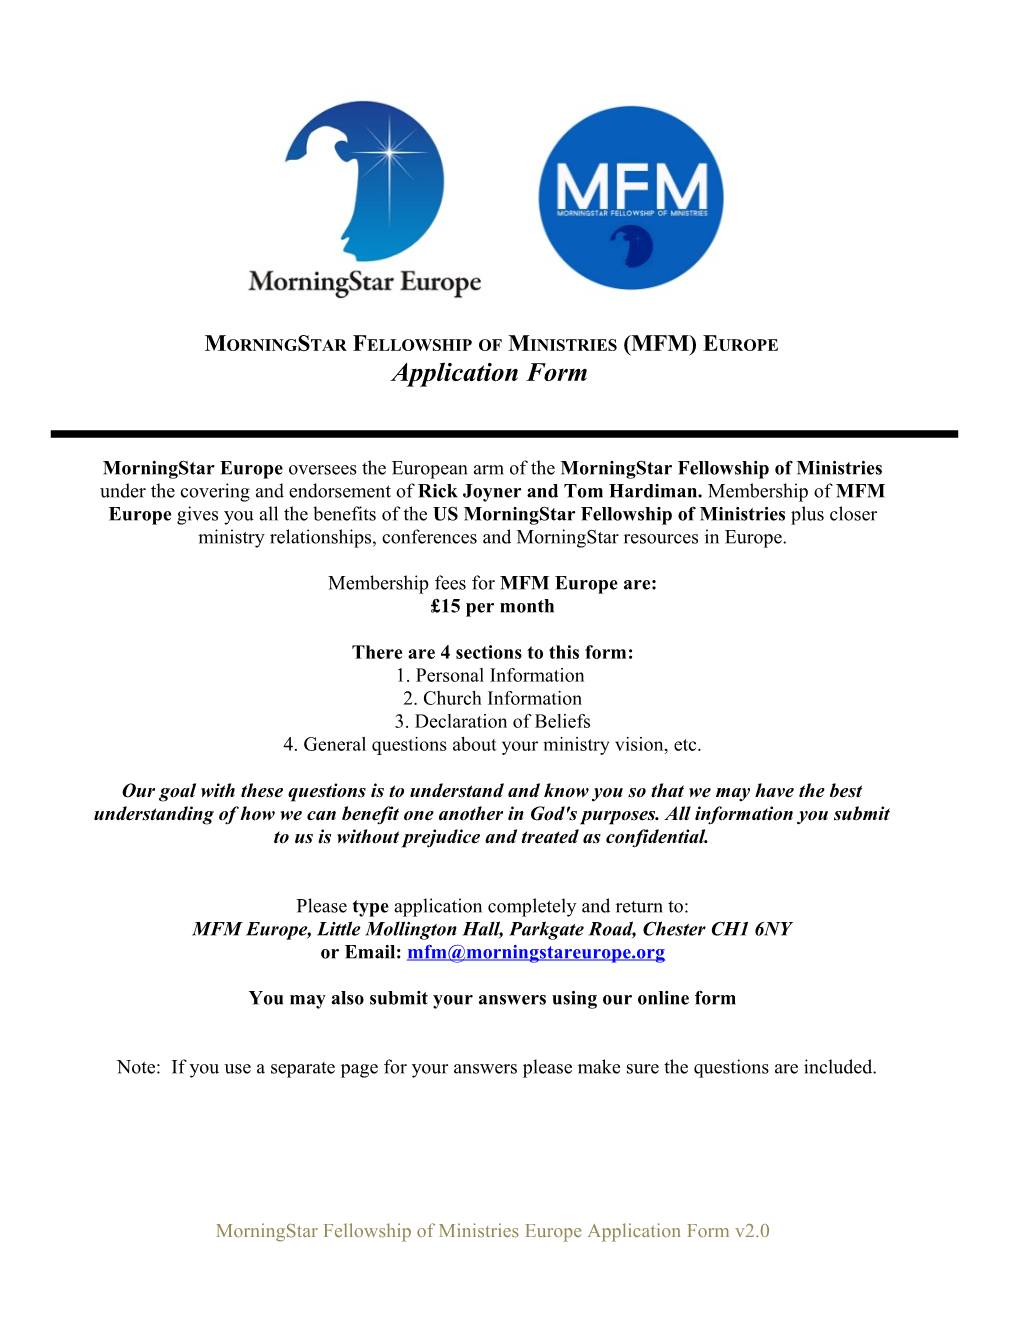 Membership Fees for MFM Europe Are